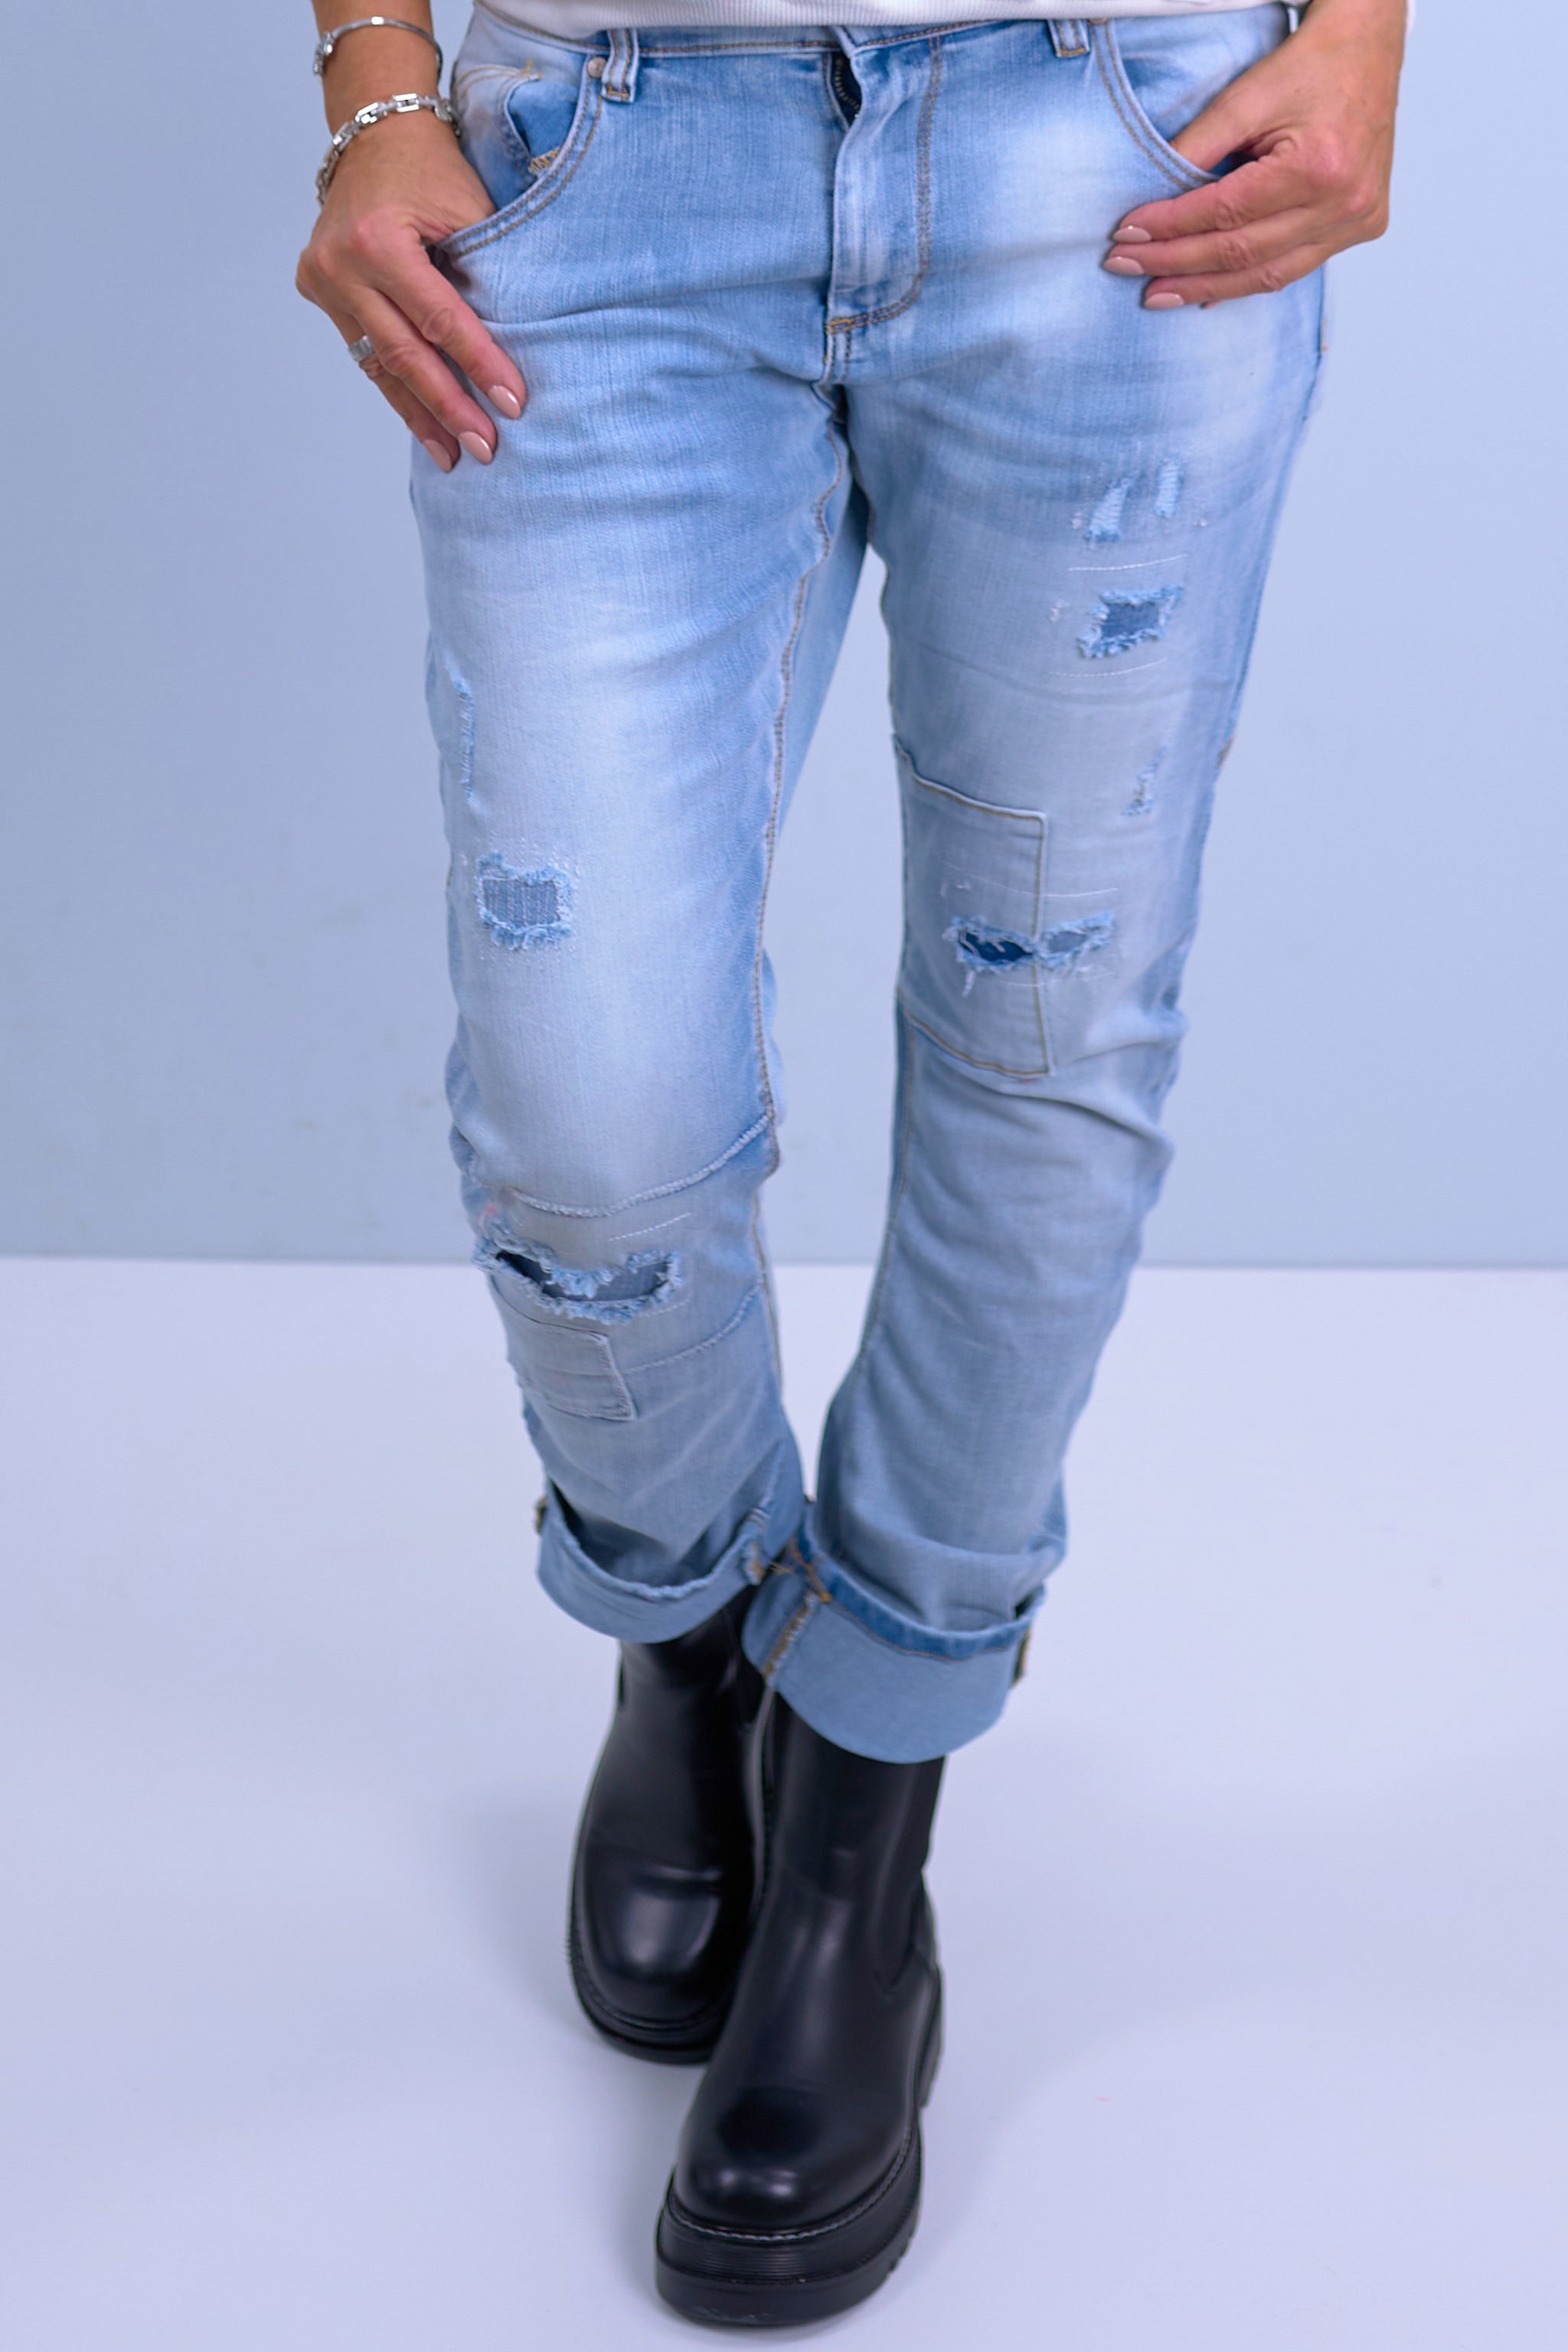 Jeans with wide cuffs, light blue